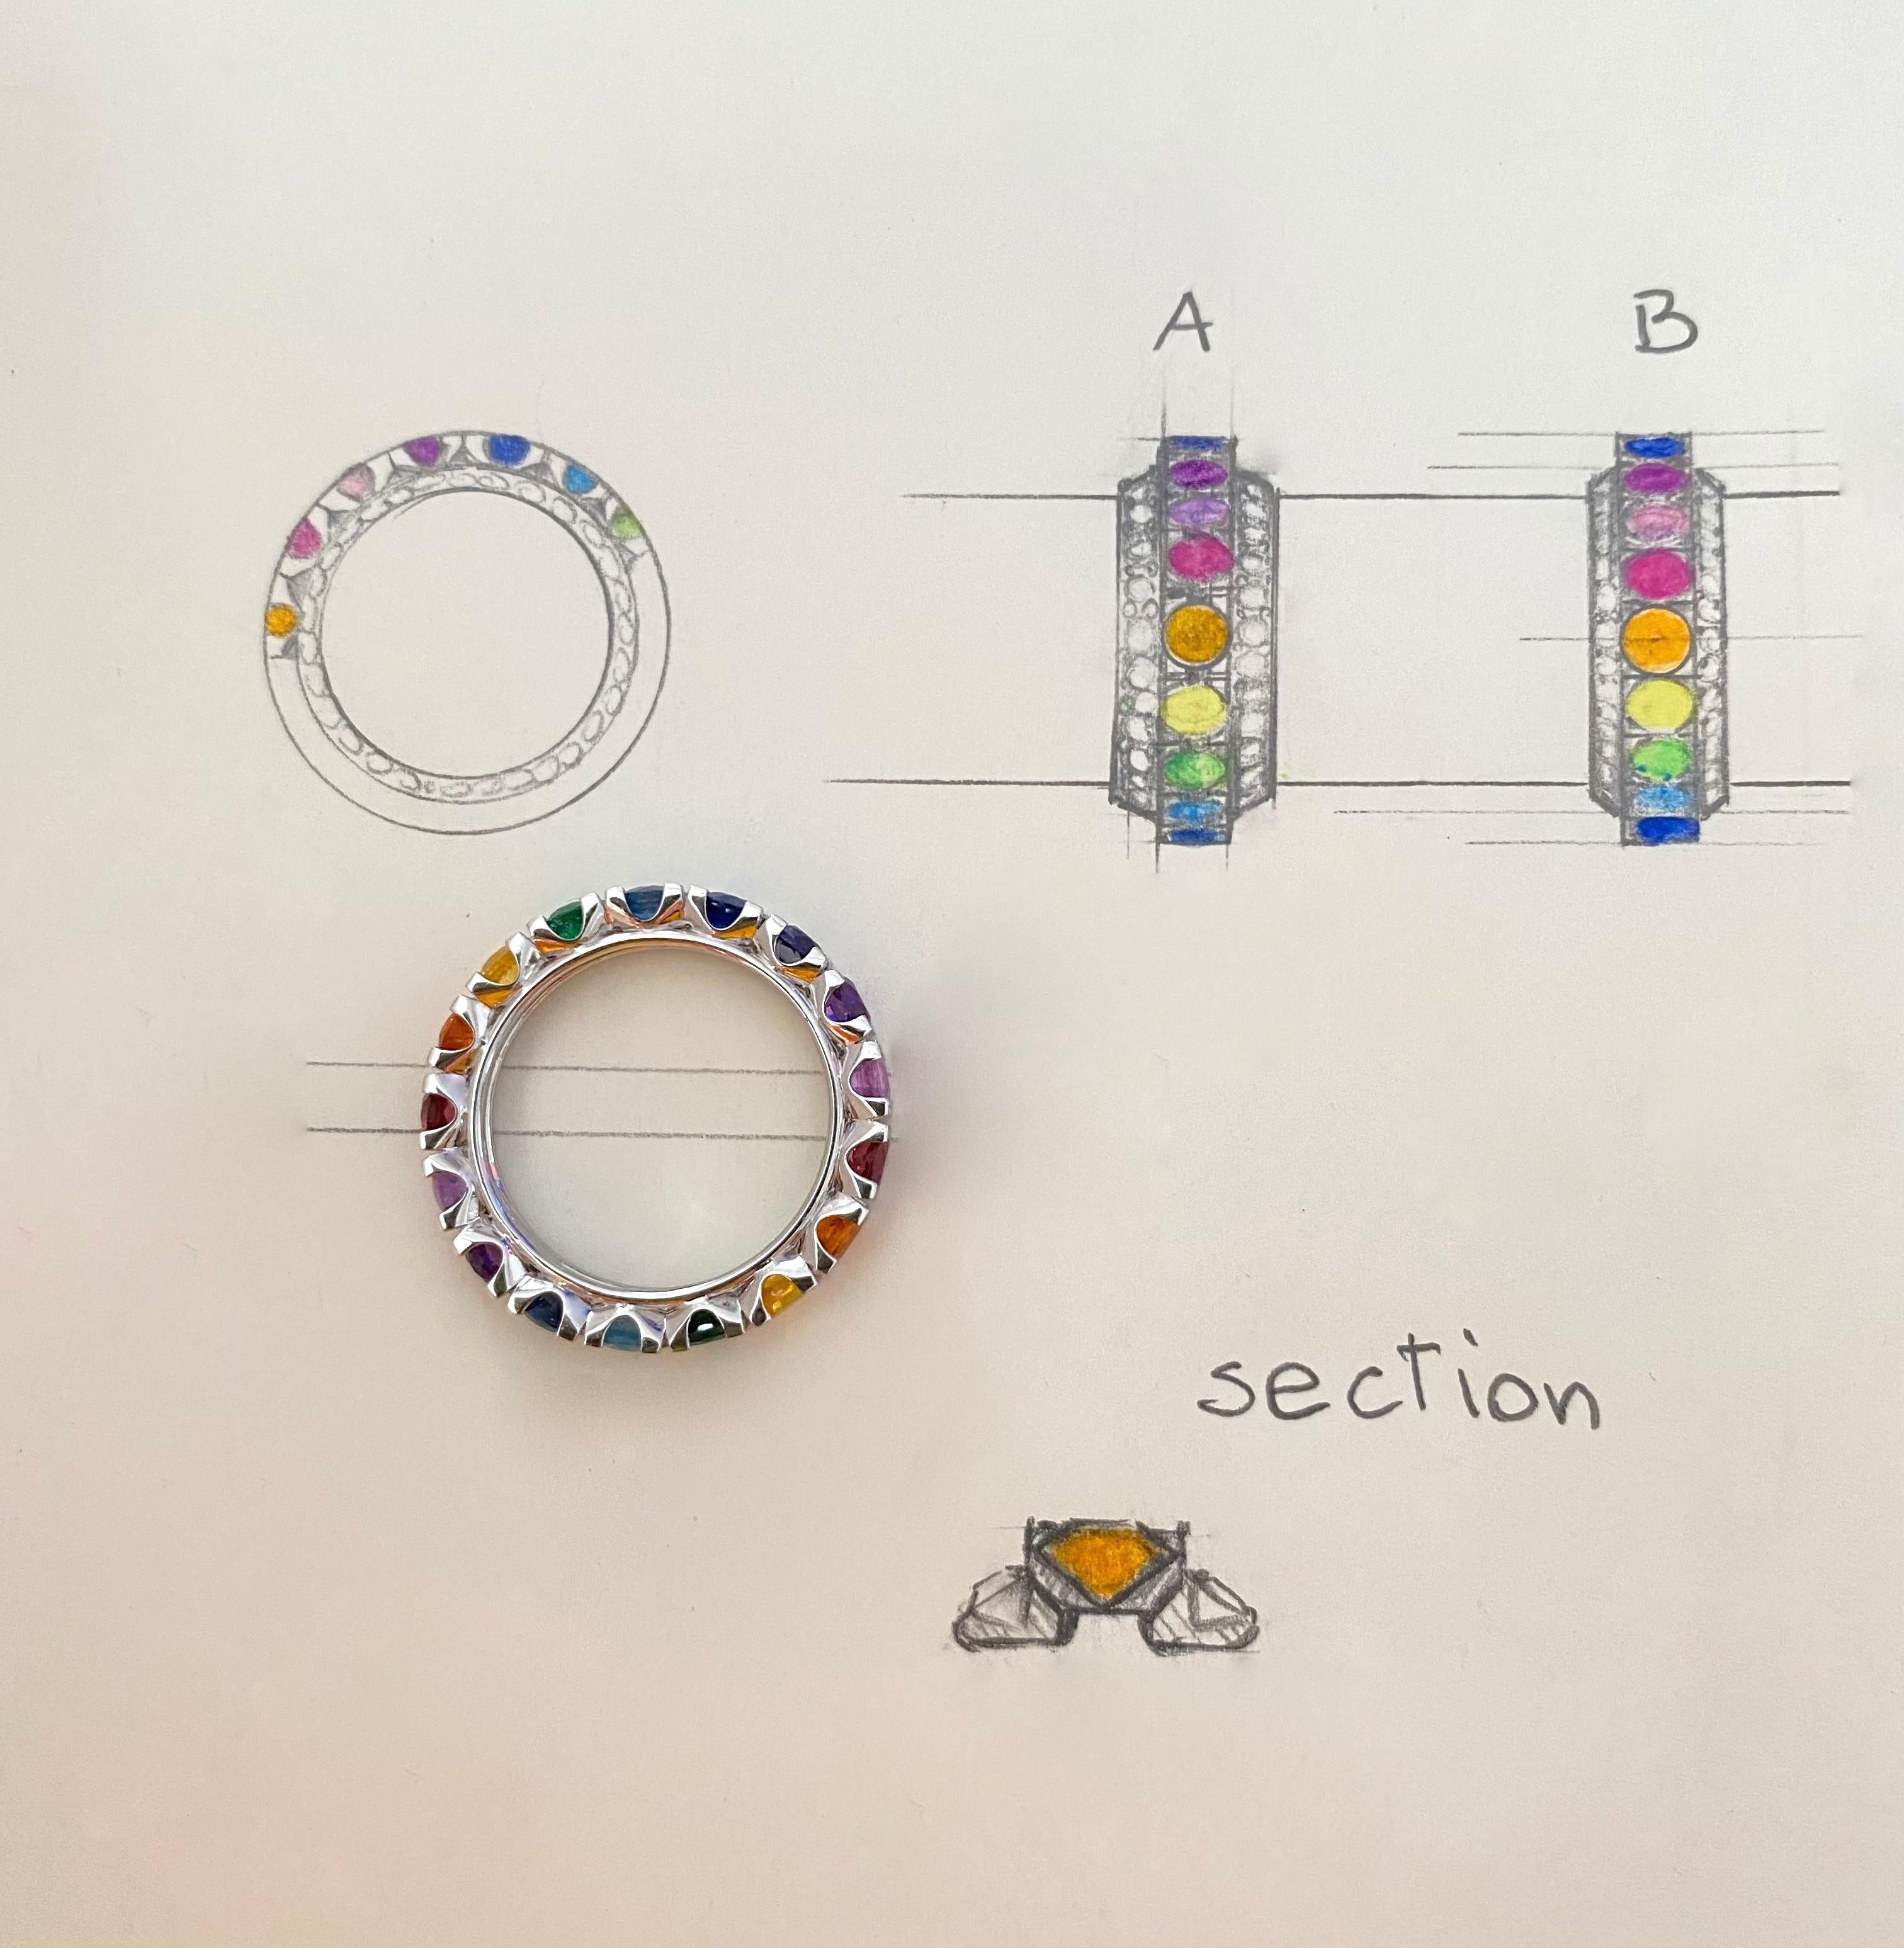 In the uploaded images, the ring corresponds to drawing B.
This project stems from a modification at the request of the customer, to place a diamond border on each side of the ring next to the central body of the rainbow ring.
As can be seen from